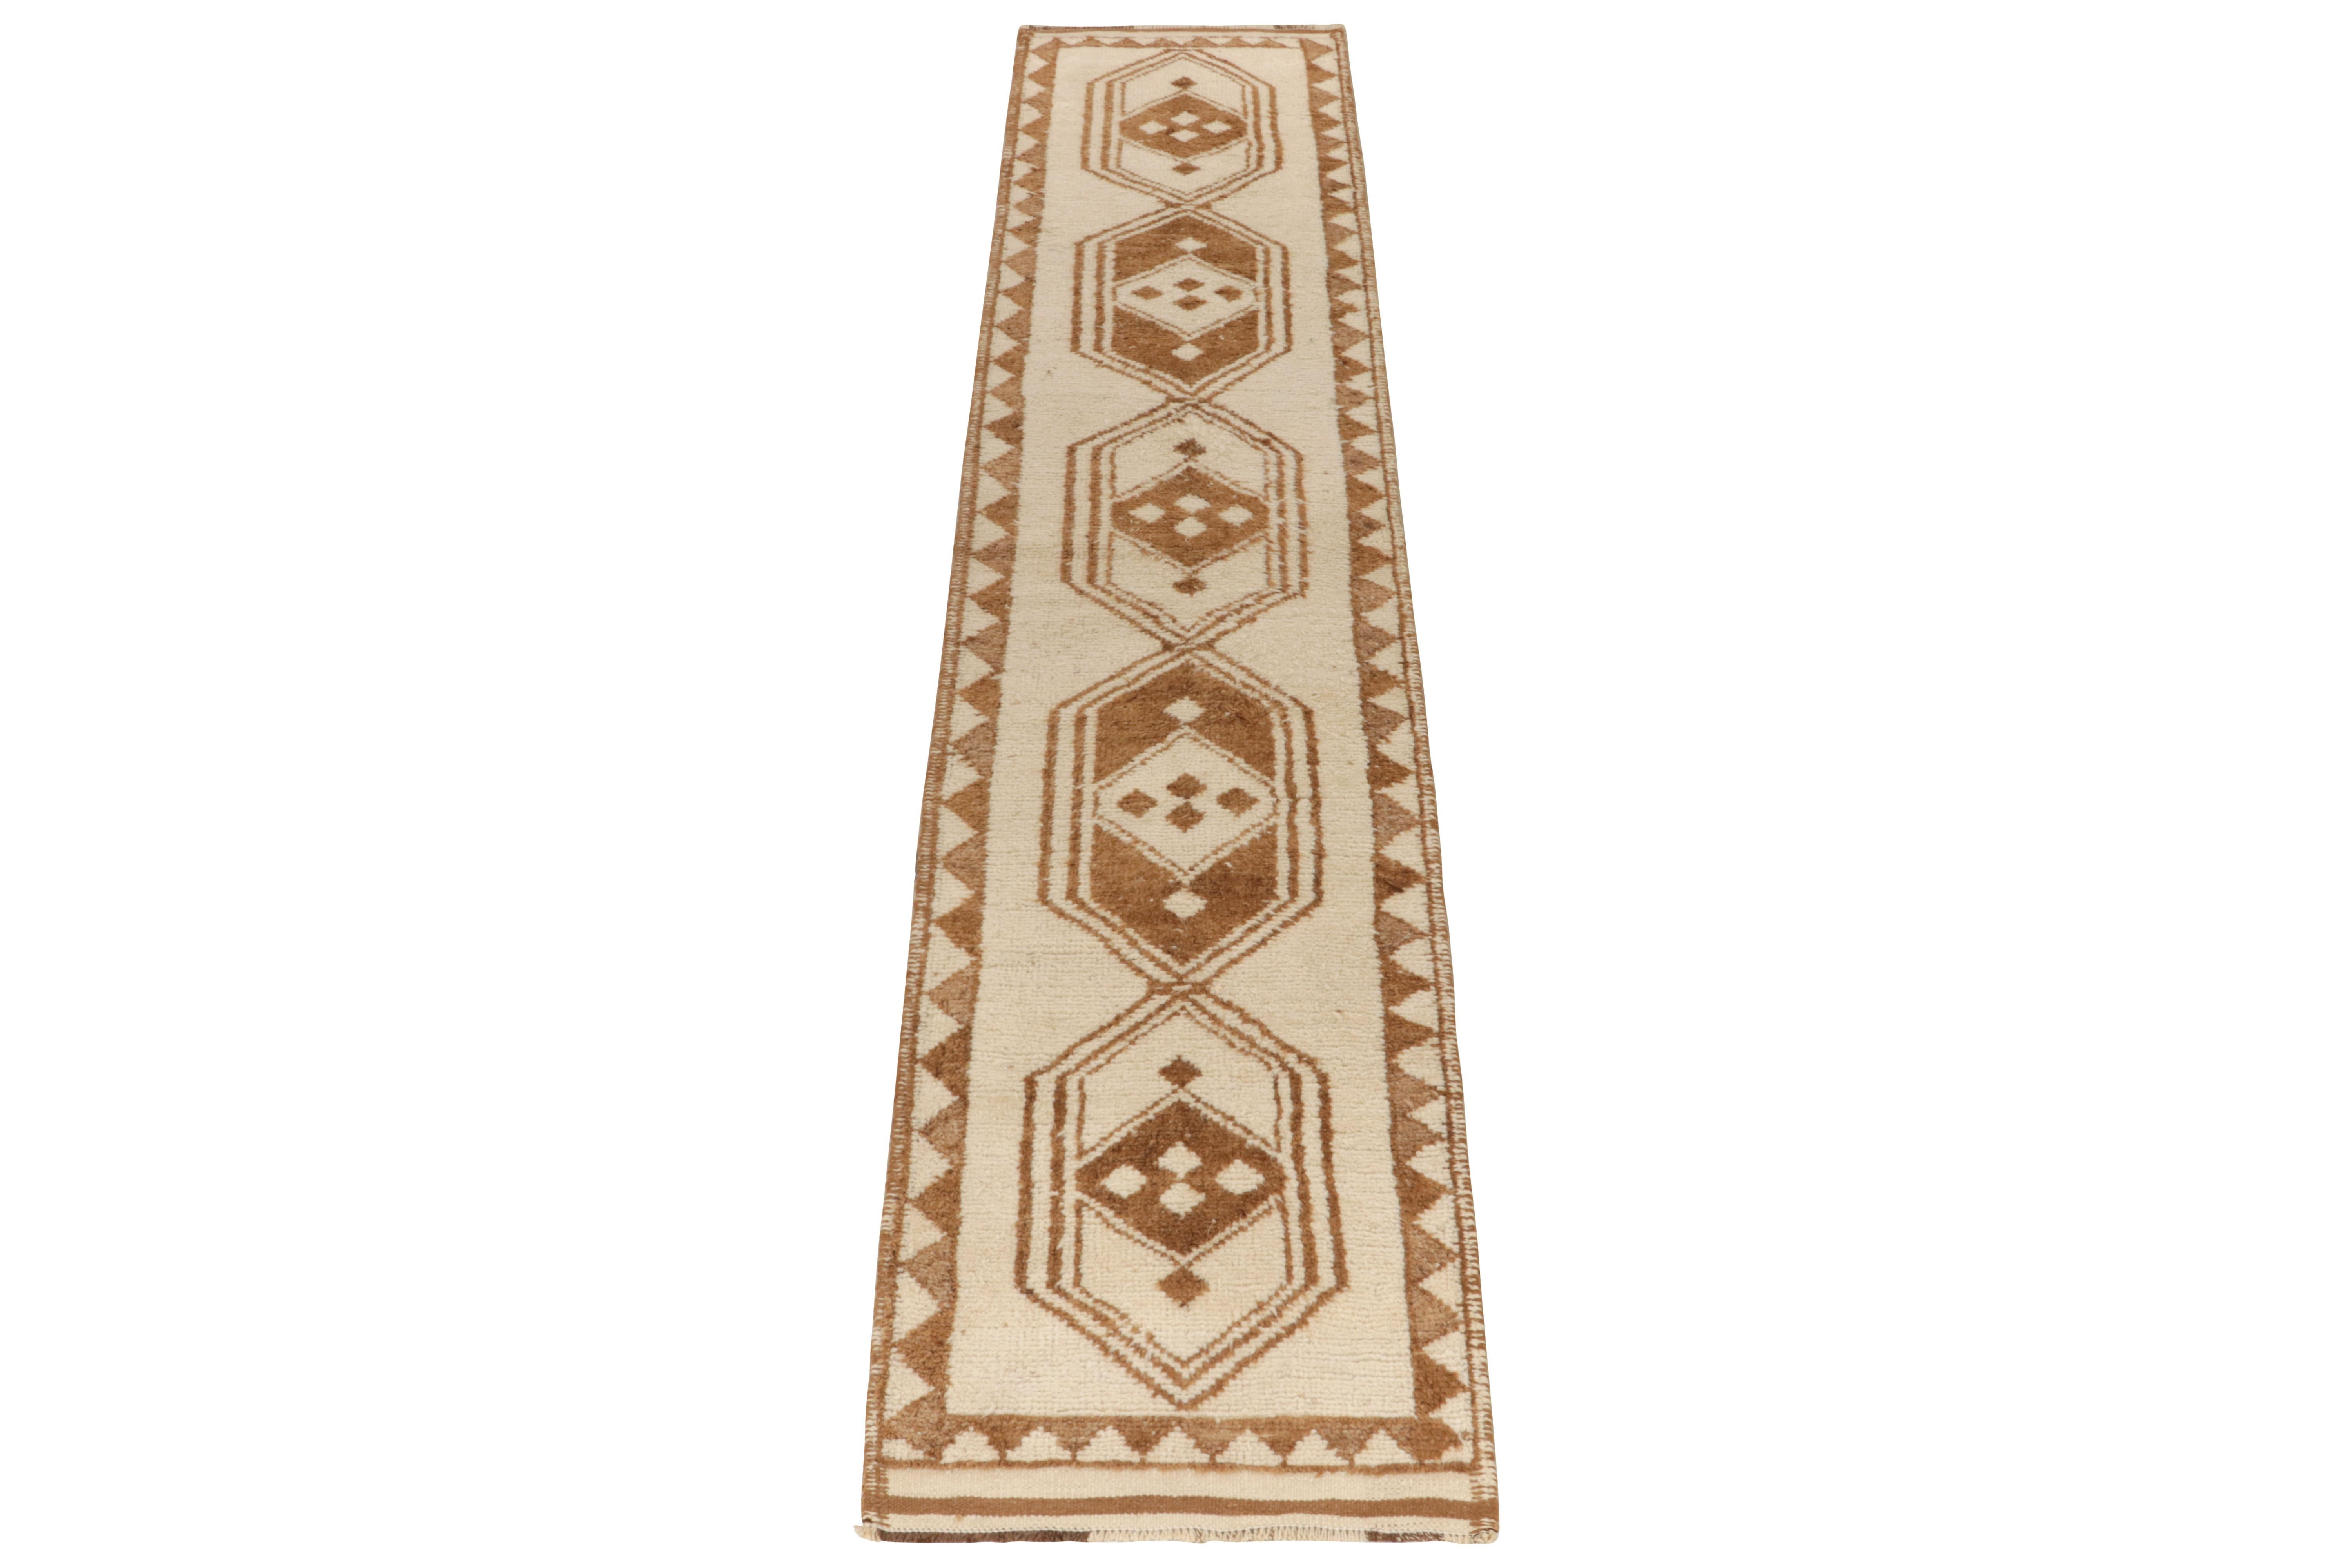 From Rug & Kilim’s vintage selections, a 3x14 hand-knotted wool runner of uniquely bright hues for nomadic inspirations. 

This 1950s tribal piece from Turkey showcases traditional motifs sitting confidently like medallions on the field in creamy